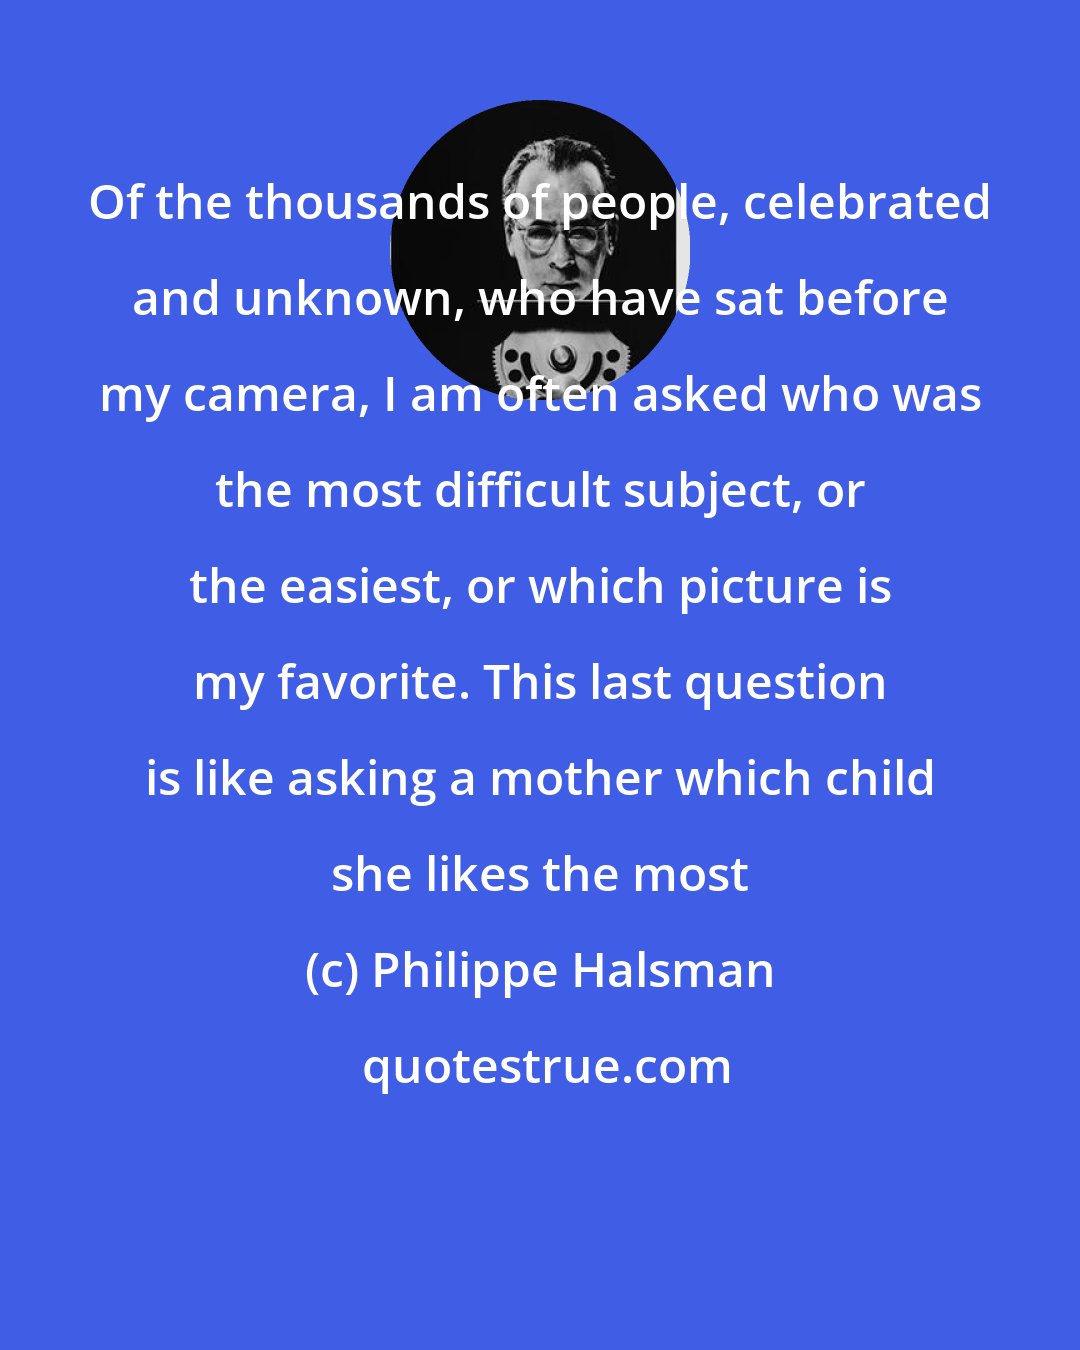 Philippe Halsman: Of the thousands of people, celebrated and unknown, who have sat before my camera, I am often asked who was the most difficult subject, or the easiest, or which picture is my favorite. This last question is like asking a mother which child she likes the most